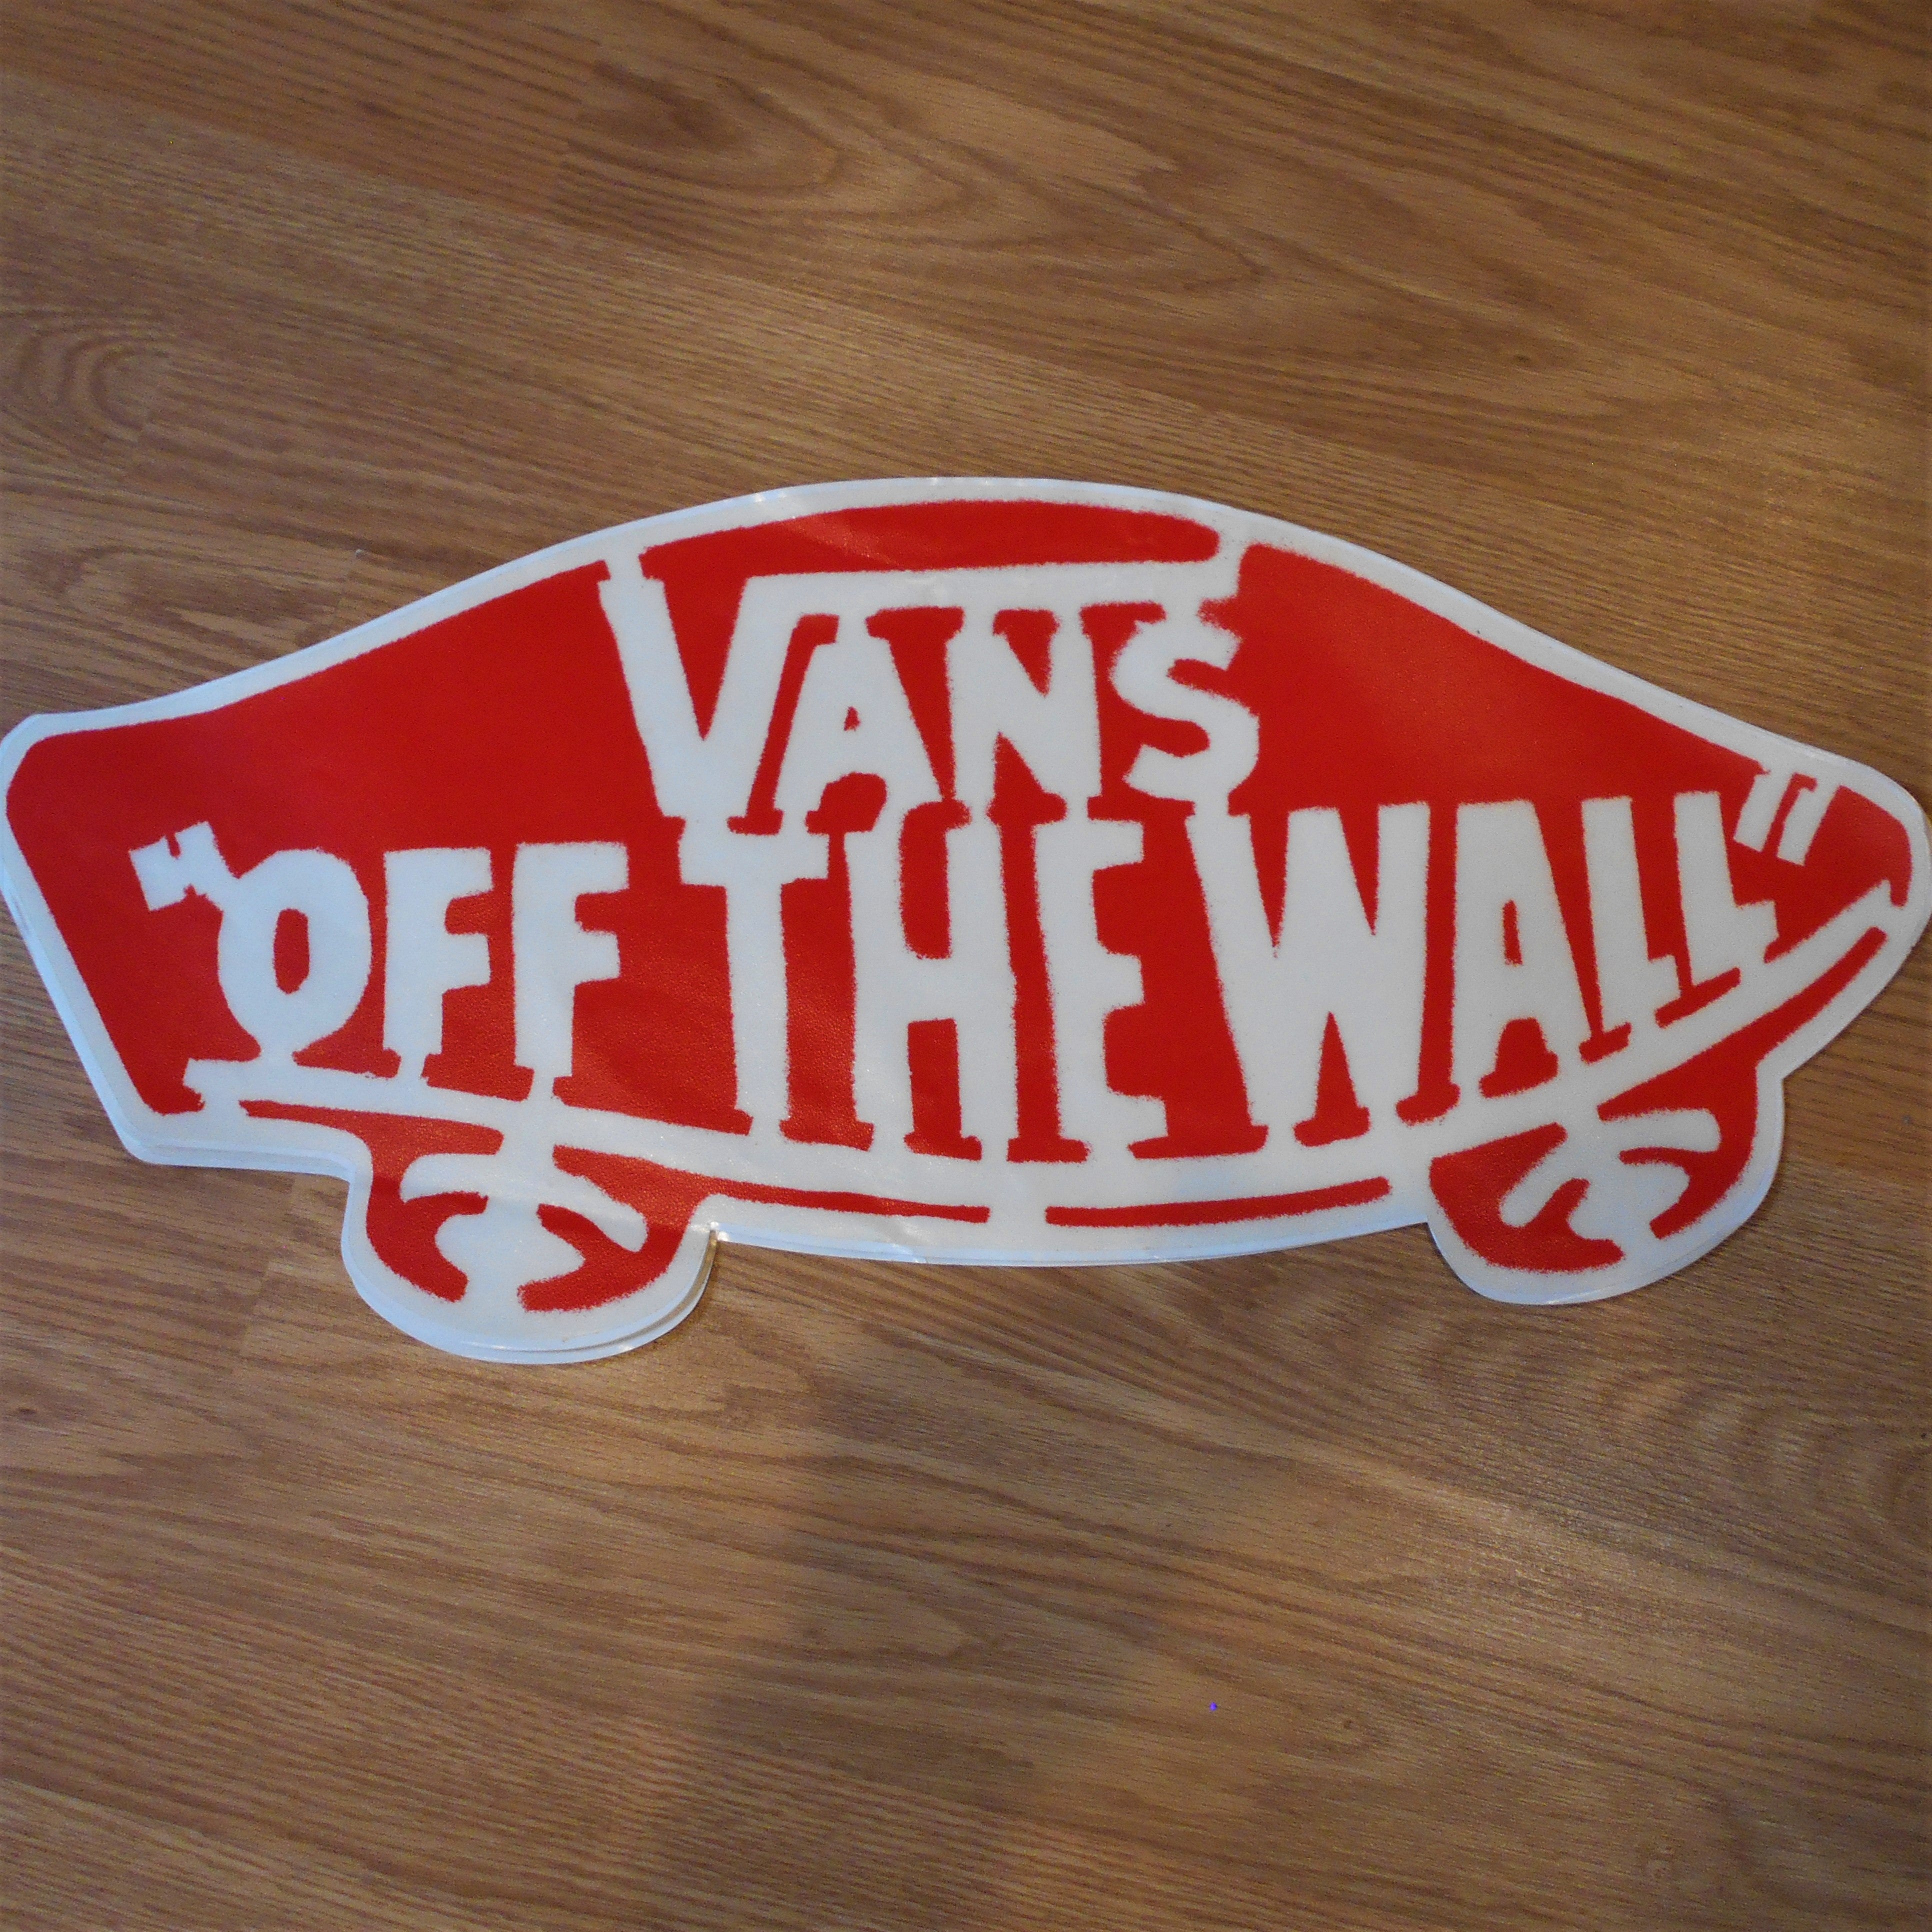 Vans Off the Wall Mega Sticker – Strictly Hardcore Surf